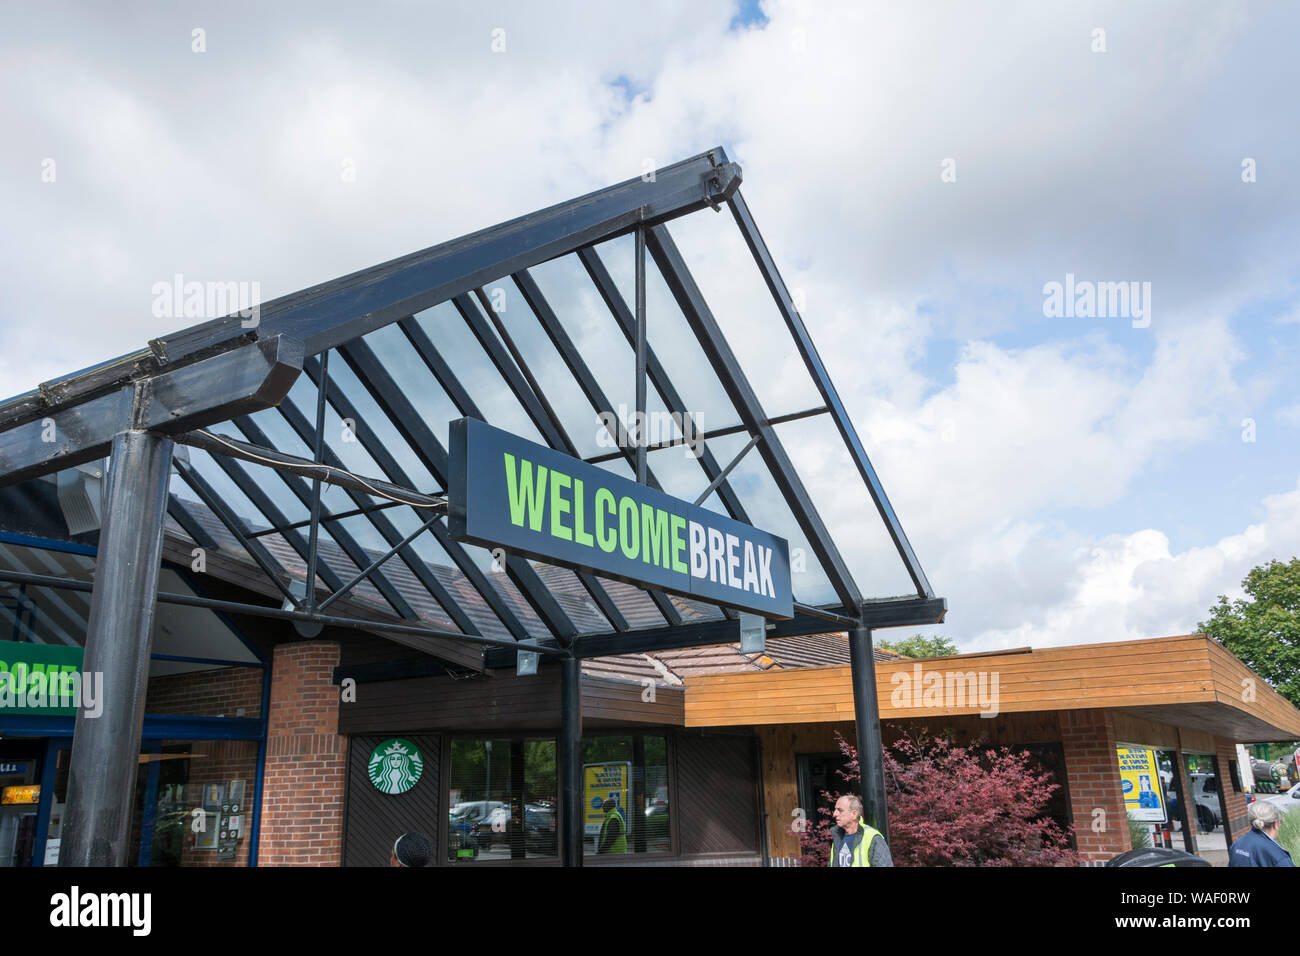 Entrance to Warwick services Welcome Break motorway service station on the M40 Stock Photo